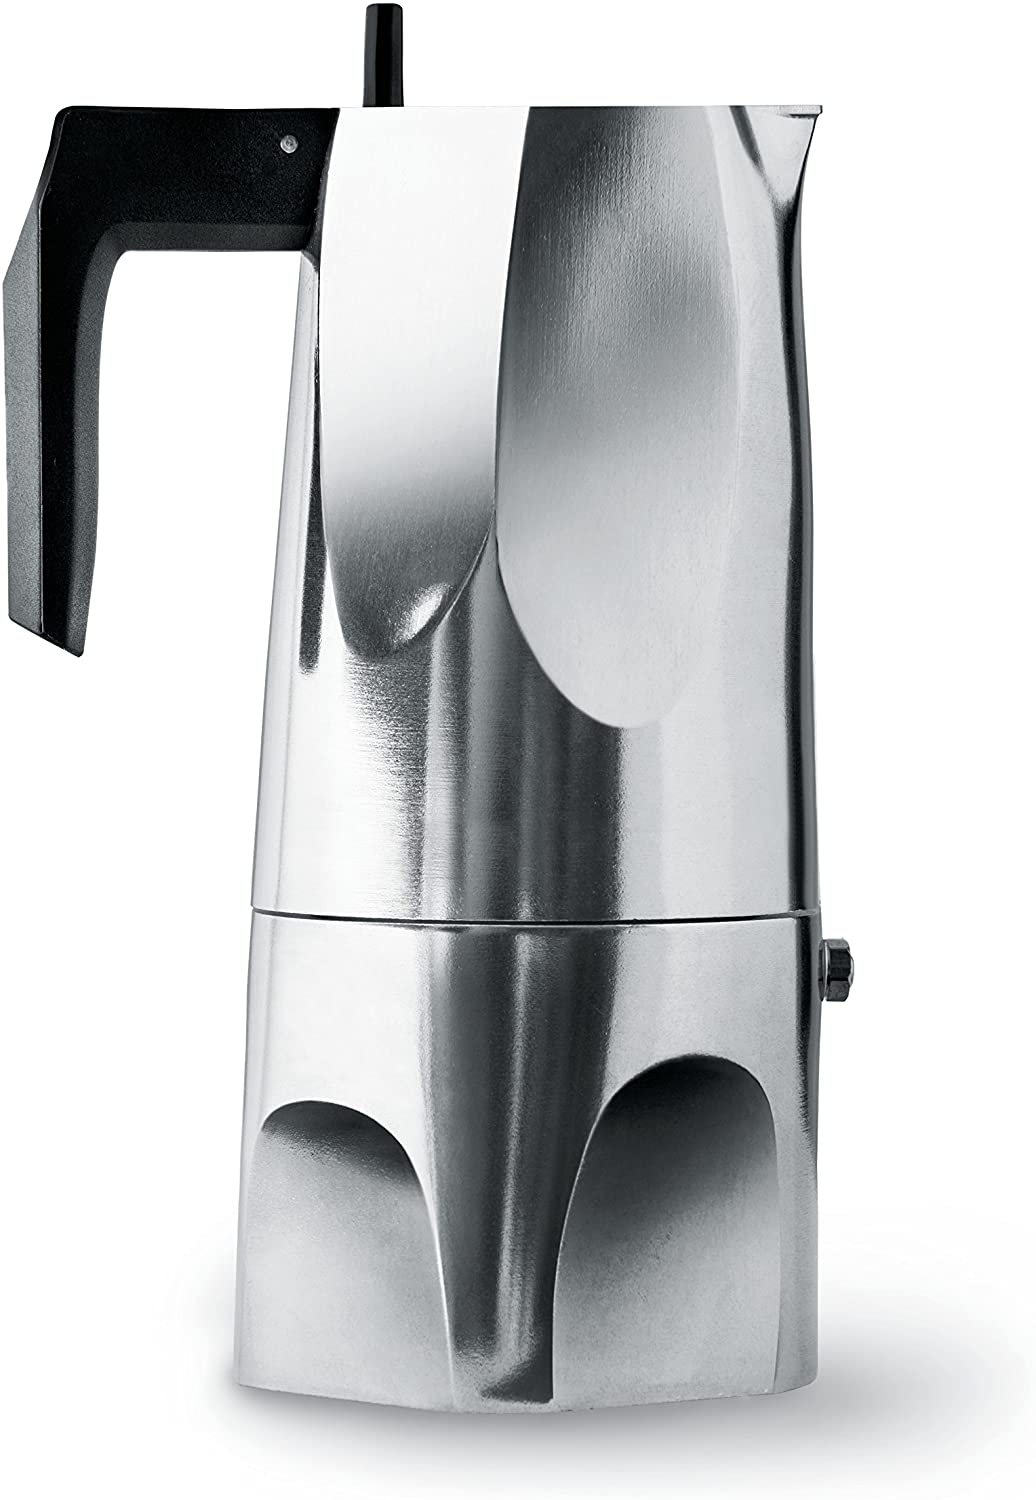 Alessi 6-Cup Ossidiana Espresso Coffee Maker in Aluminium Casting Handle with Knob in Thermo Plastic ResinBlack